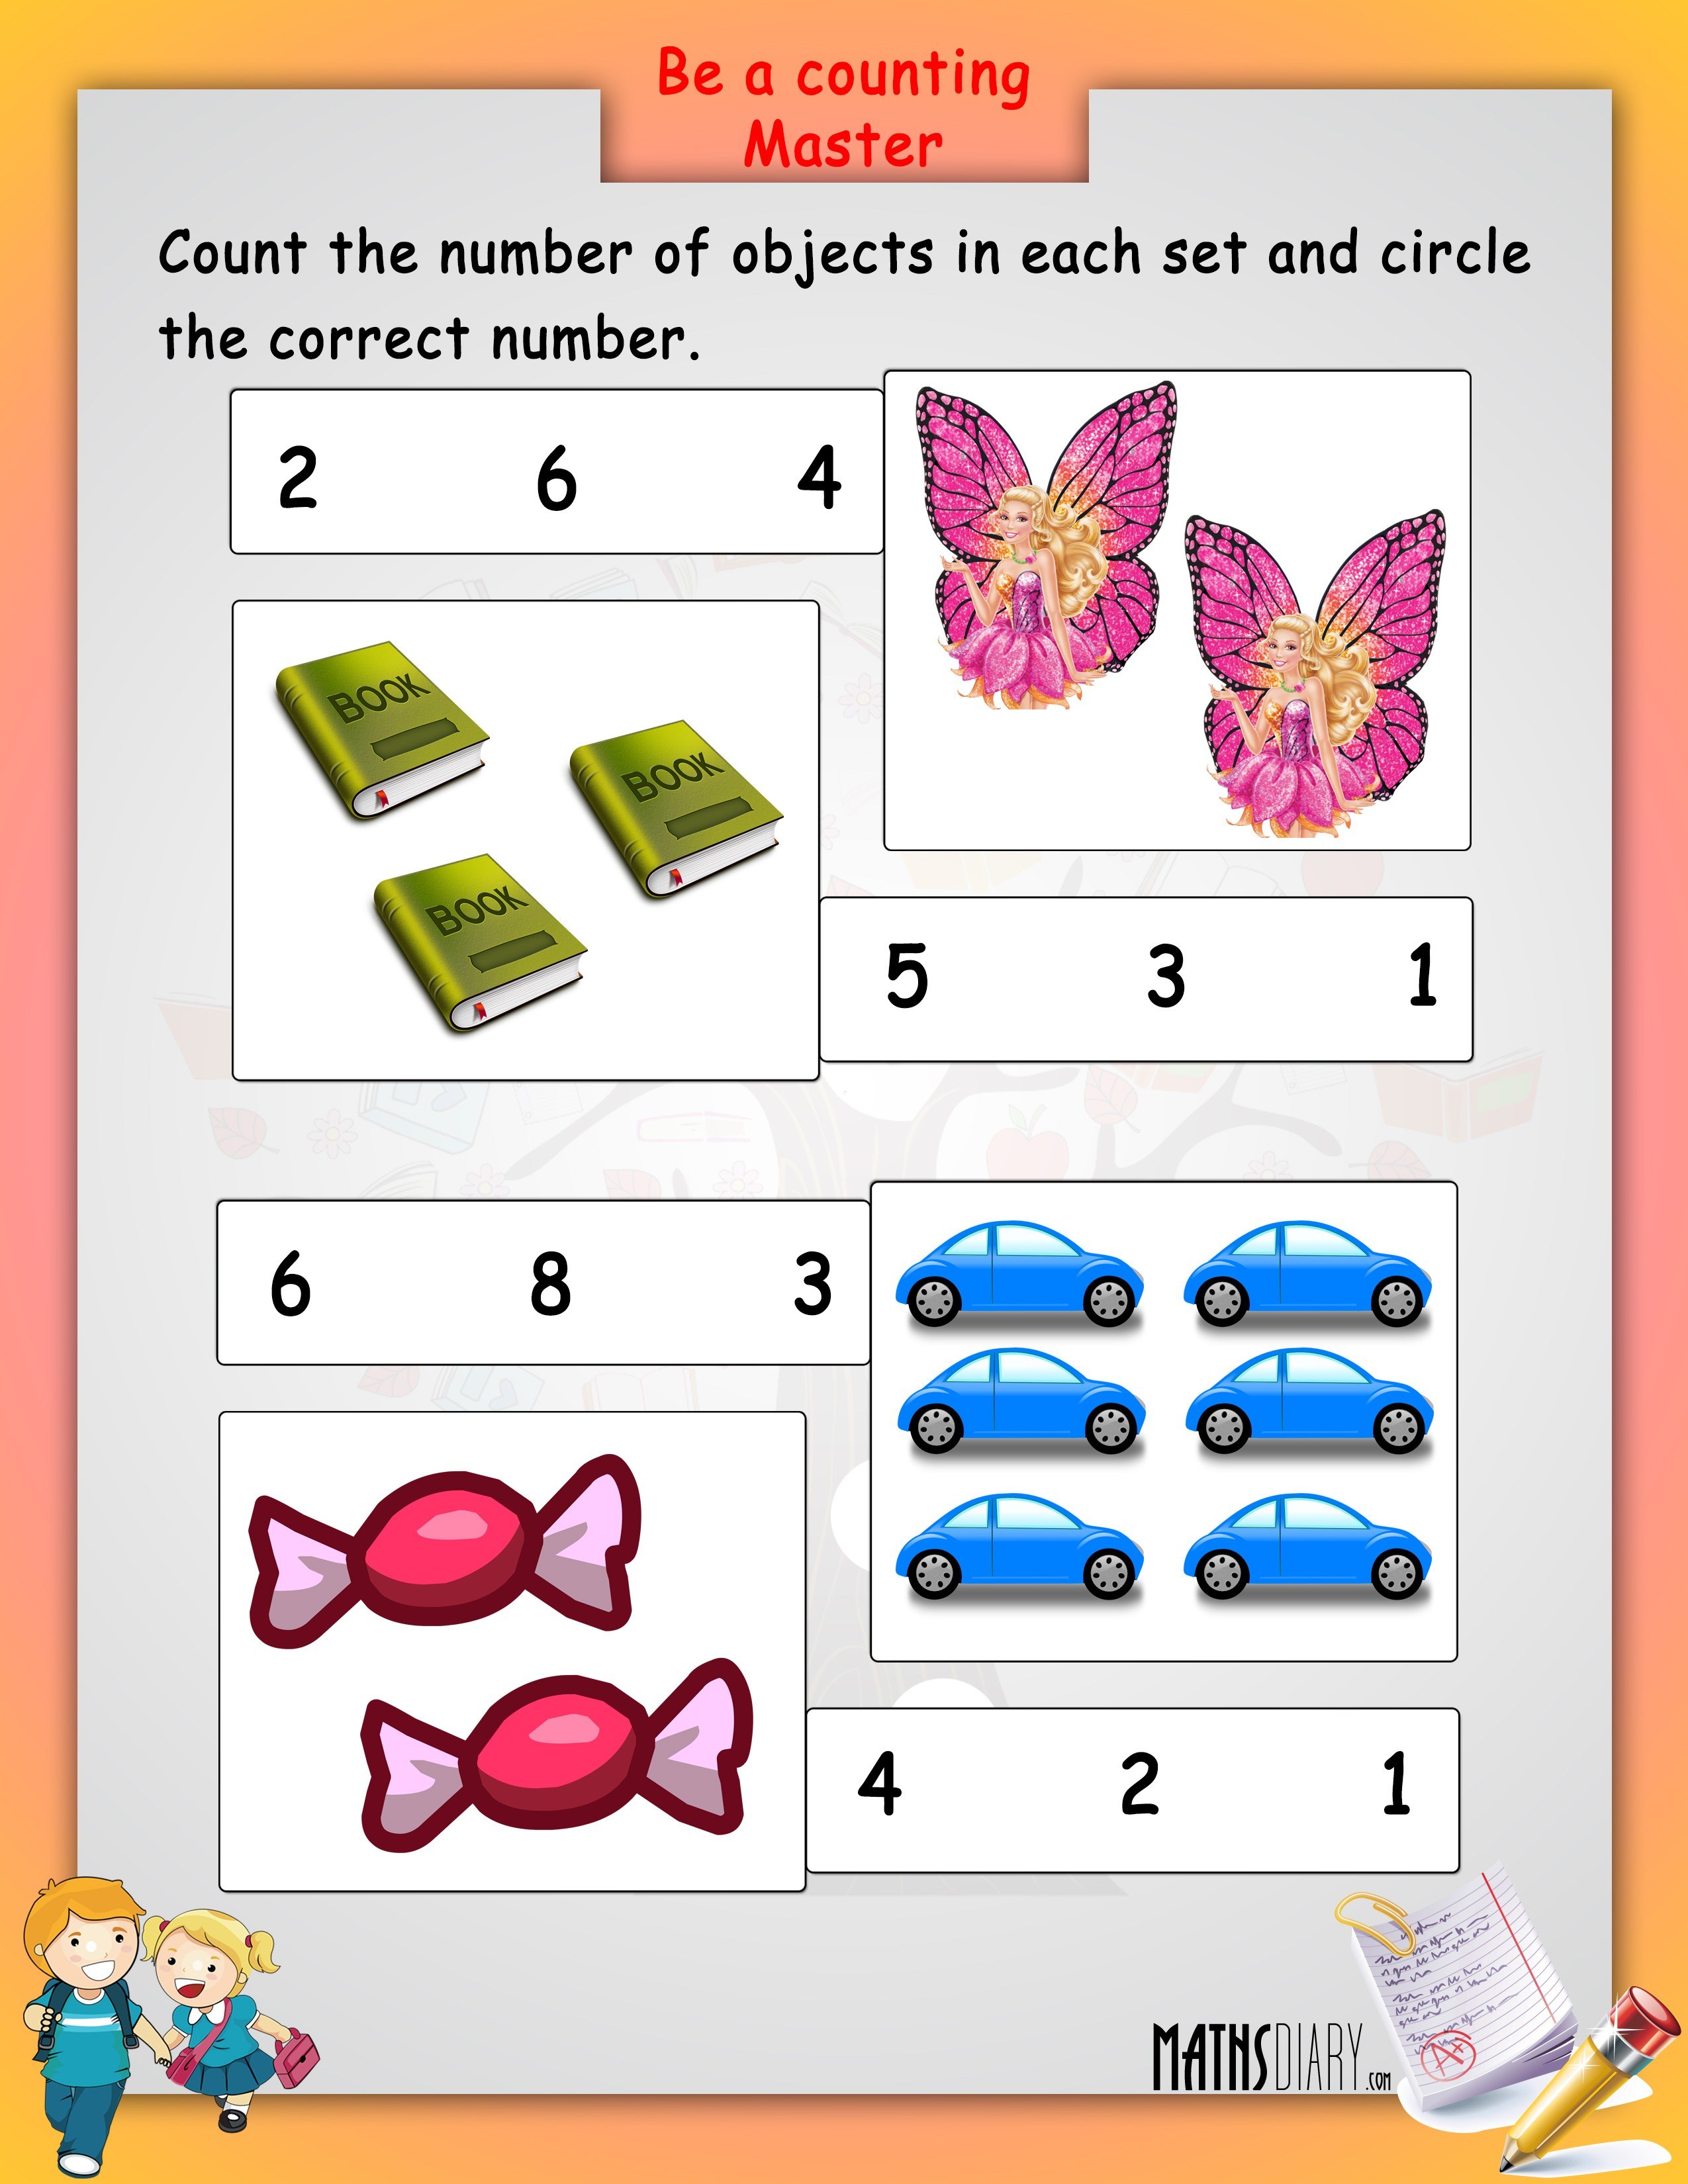 count-objects-in-each-set-math-worksheets-mathsdiary